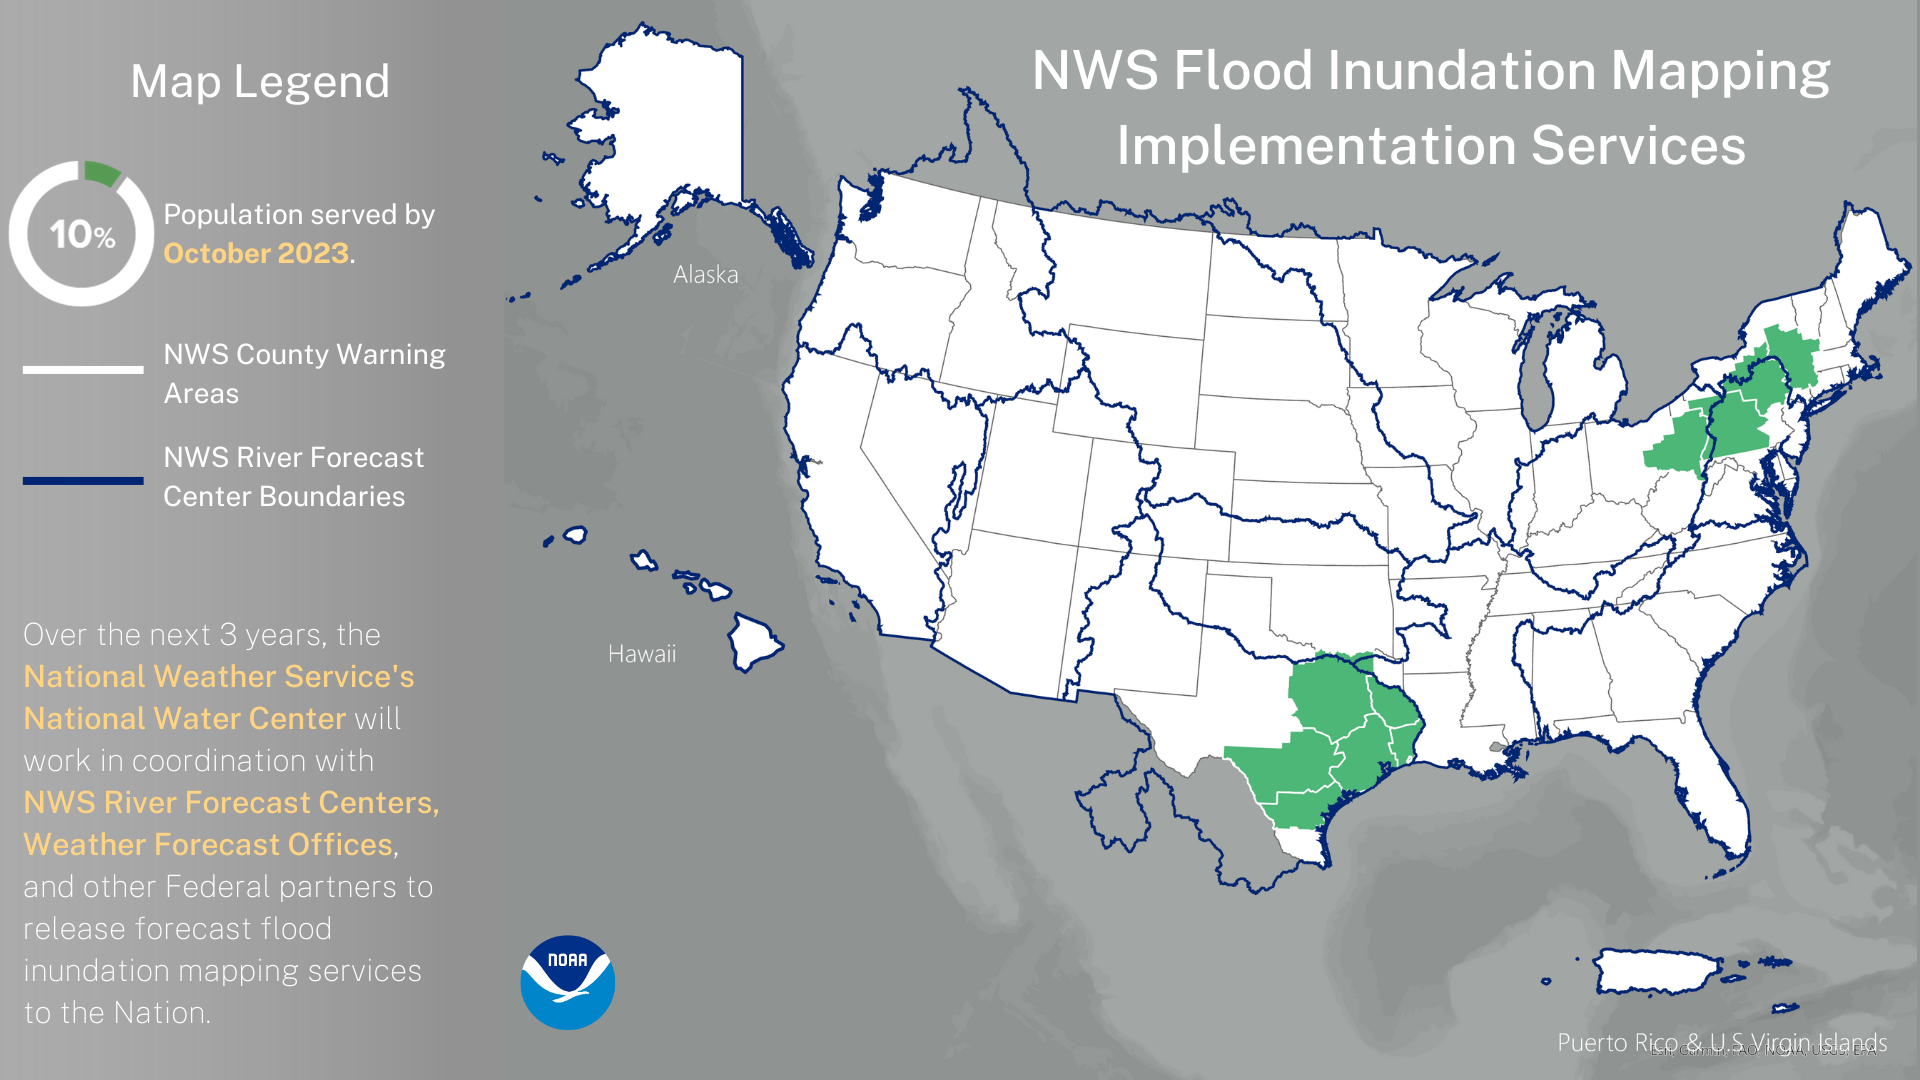 Pictured: A map highlighting new pilot flood services offered by the NWS.